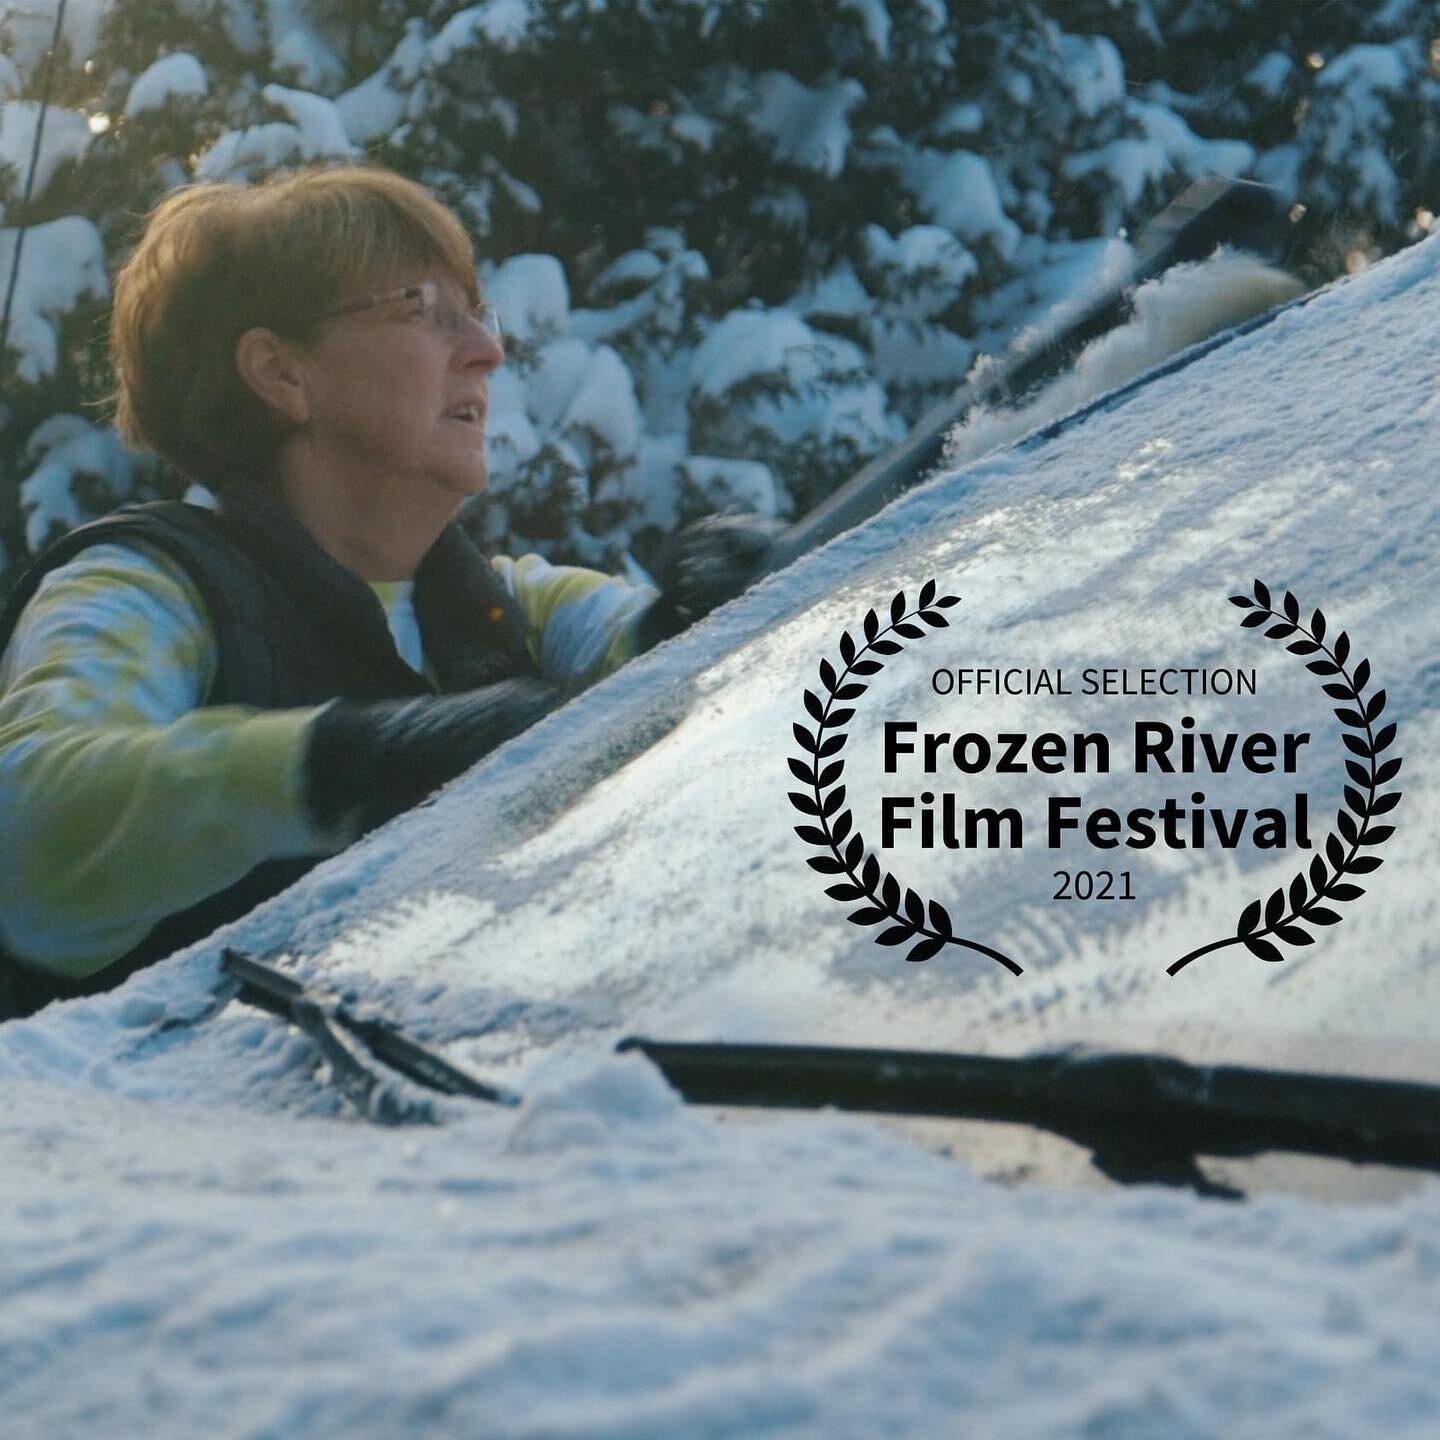 Thrilled to be a part of the Frozen River Film Festival beginning February 11th! ❄⛸

Tickets to a virtual screening are available at the link in our bio 🎟